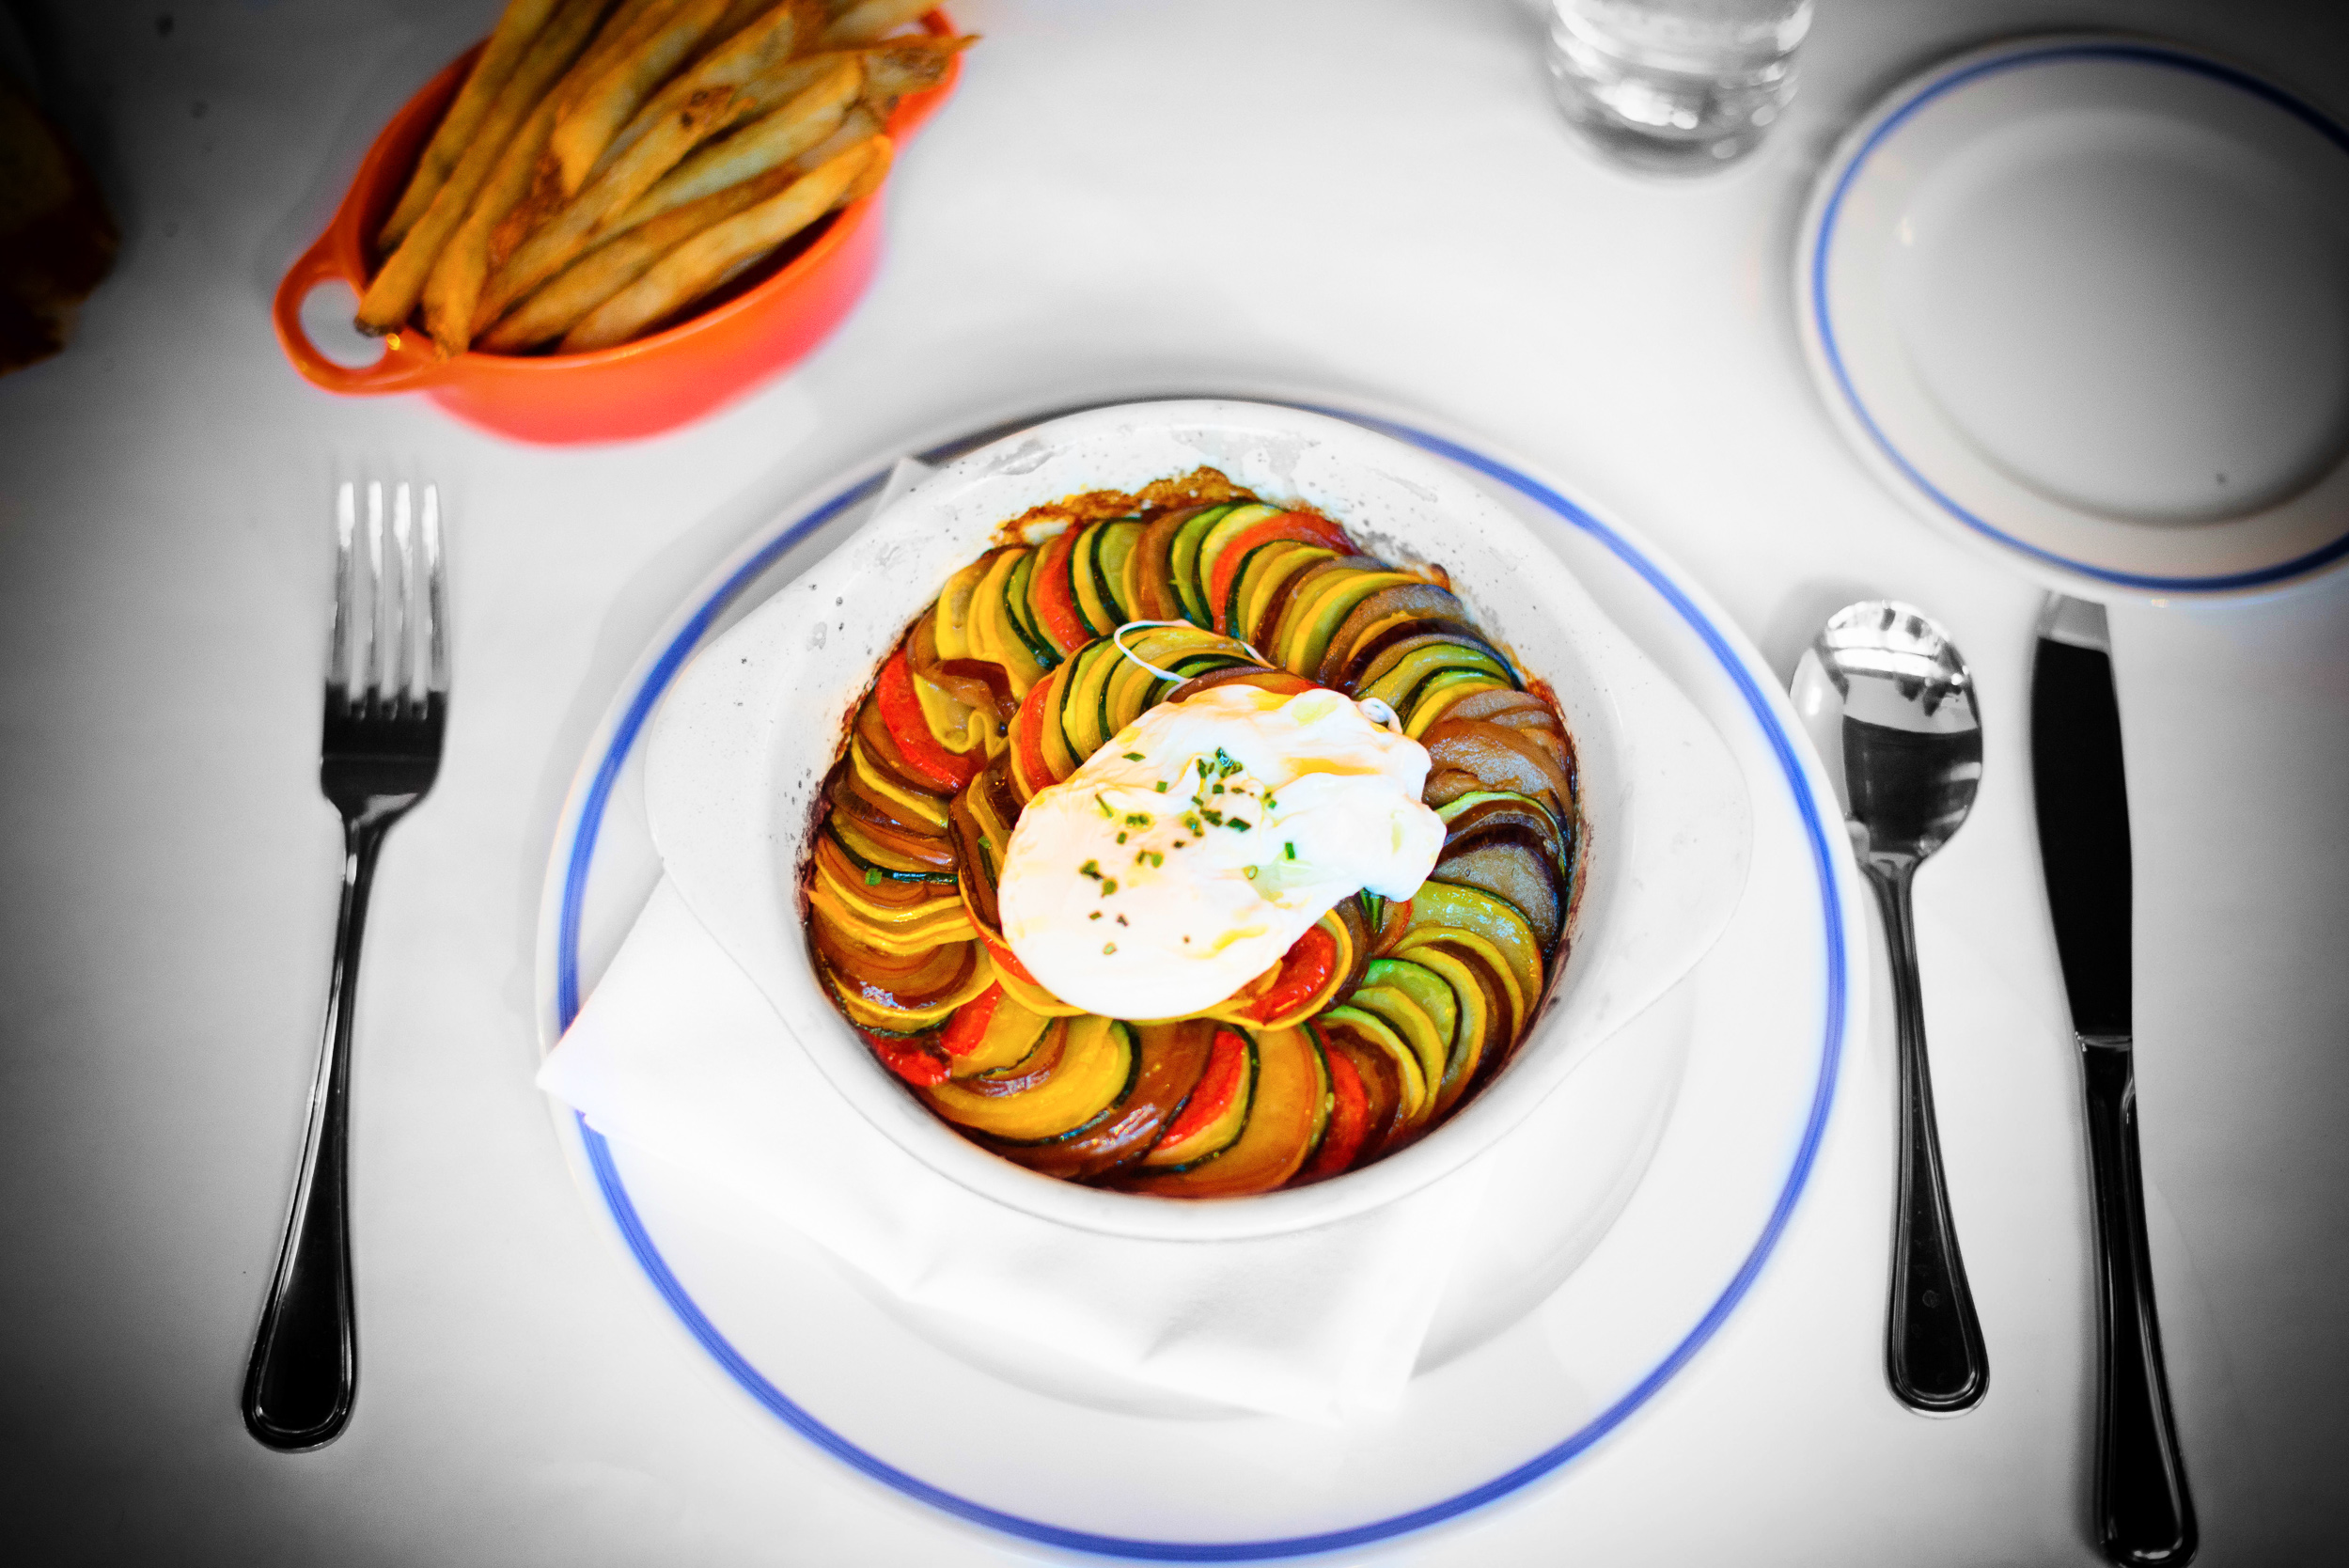 Ratatouille - oven-dried tomatoes, Japanese eggplant, soft-poach